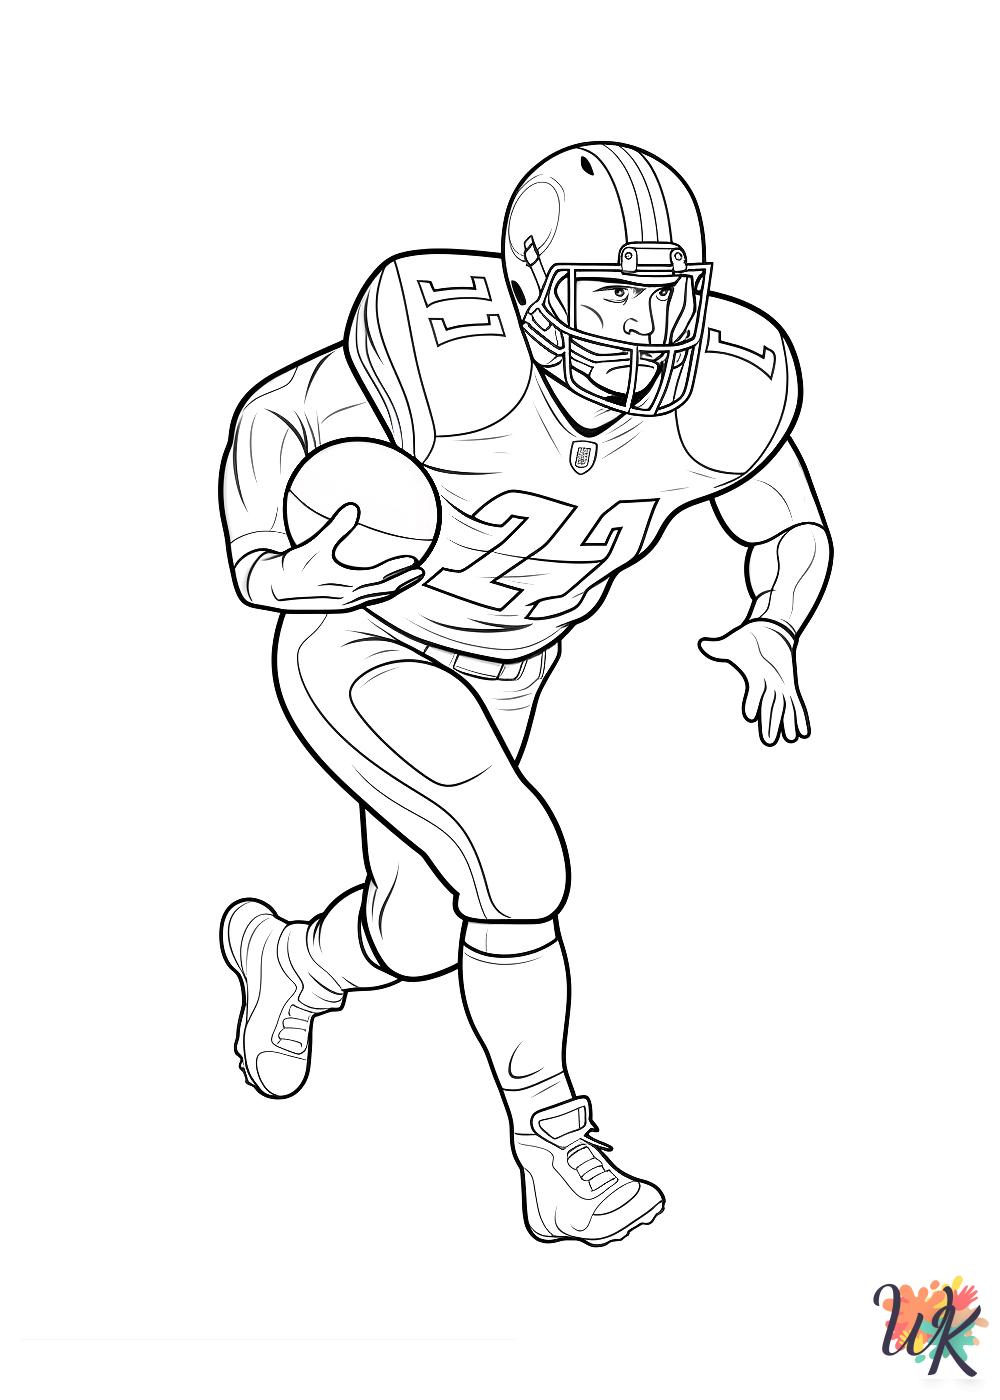 NFL coloring pages printable